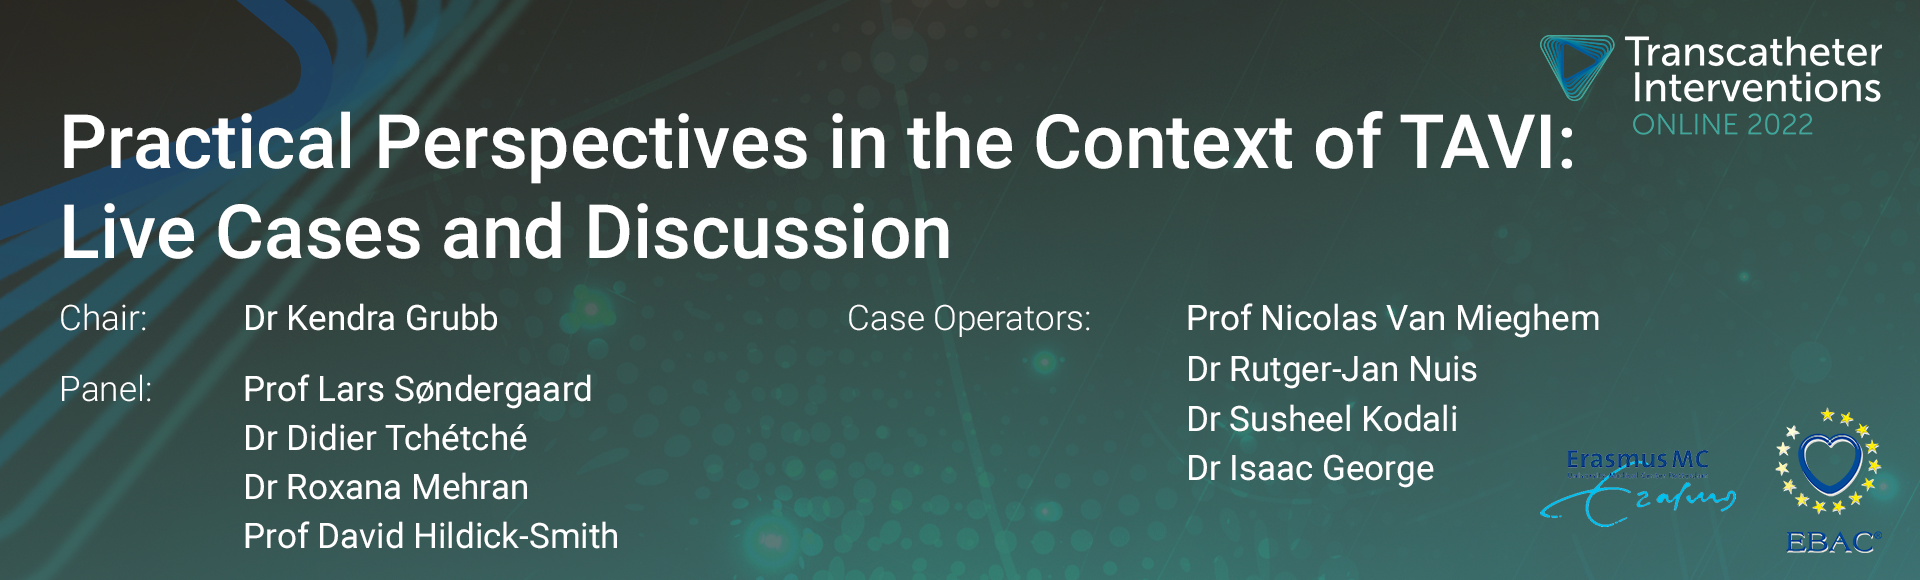 TIO 2022- Session 1.4: Practical Perspectives in the Context of TAVI: Live Cases and Discussion